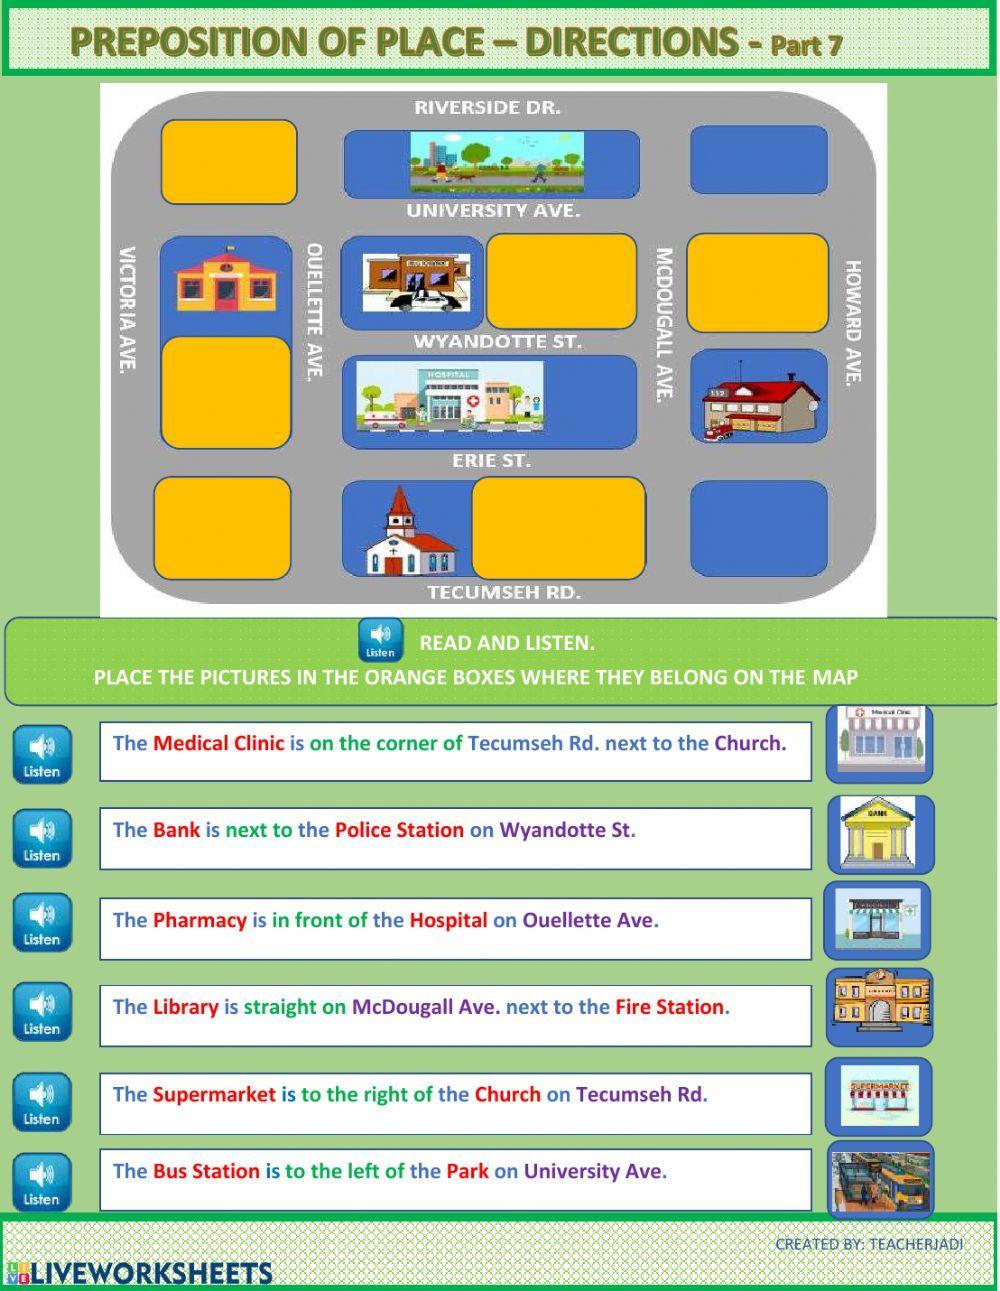 Prepositions of Place -Directions Part 7